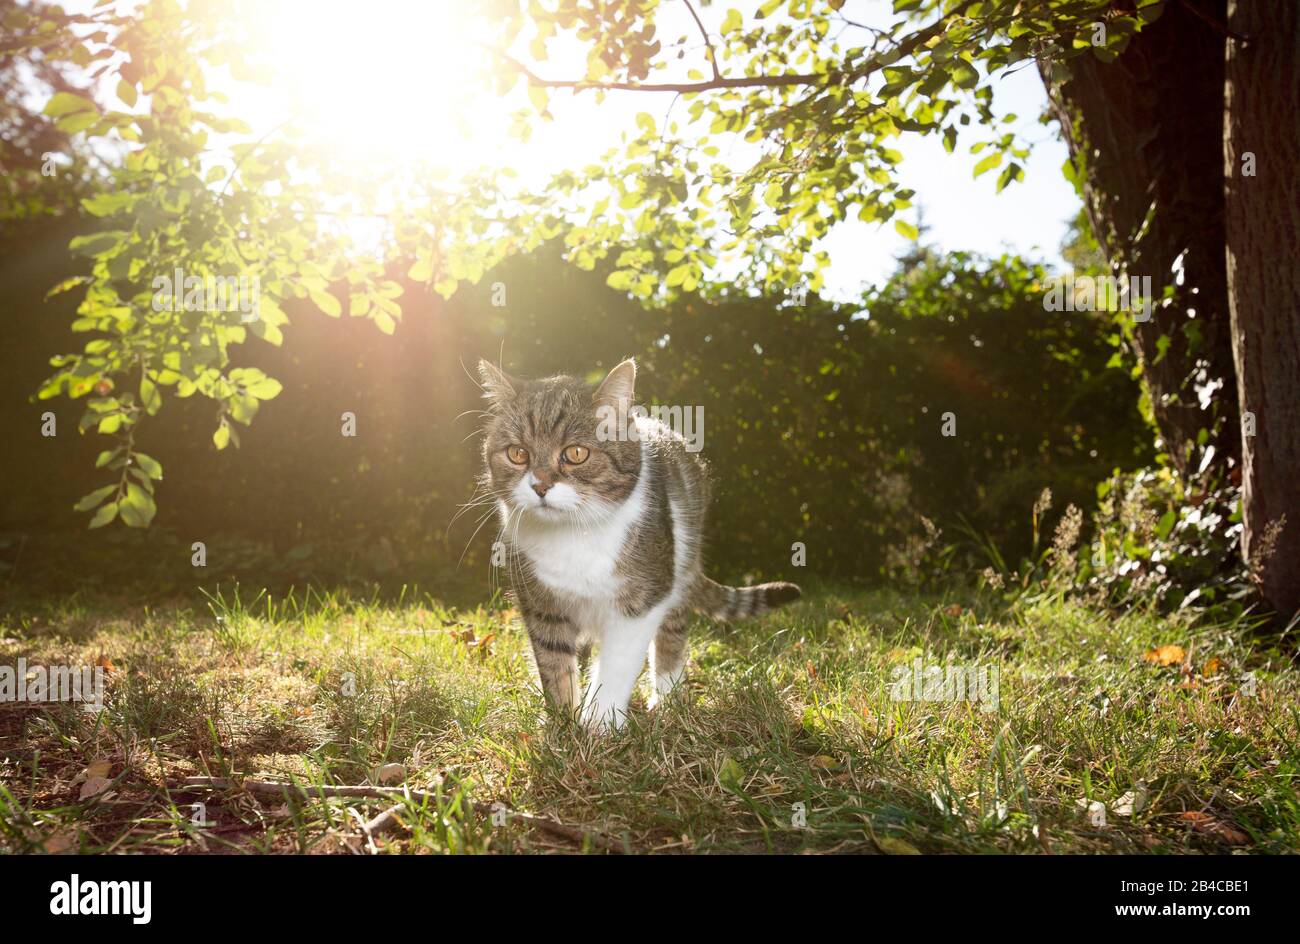 tabby white british shorthair cat outdoors on the move exploring nature right before sunset Stock Photo